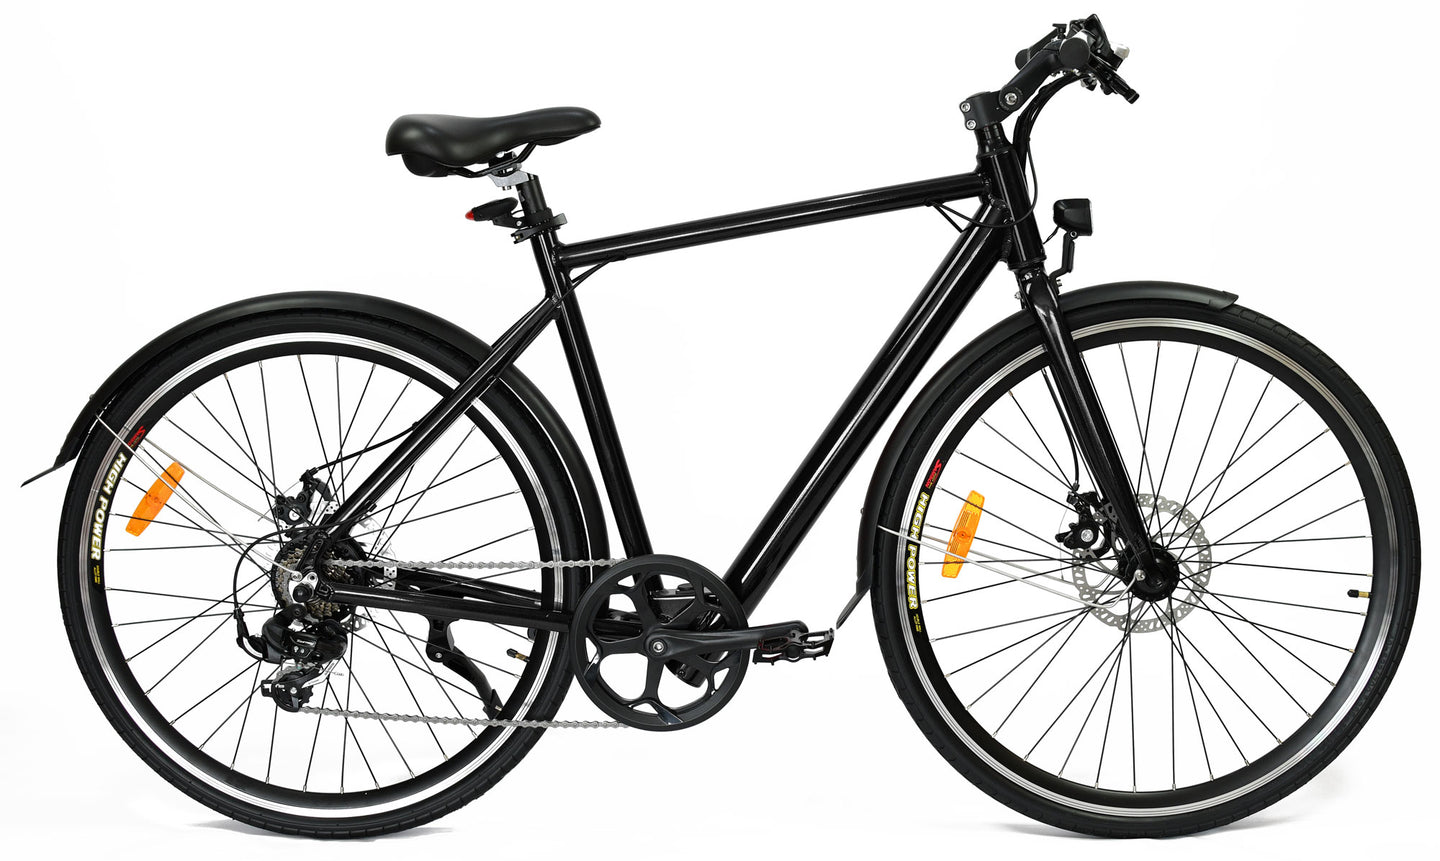 DISCOUNTED 700c Electric Bike | Leitner Ultimate Step-Over BLACK with scratch and signs of usage  - Assembled and pickup from Ferntree Gully VIC only